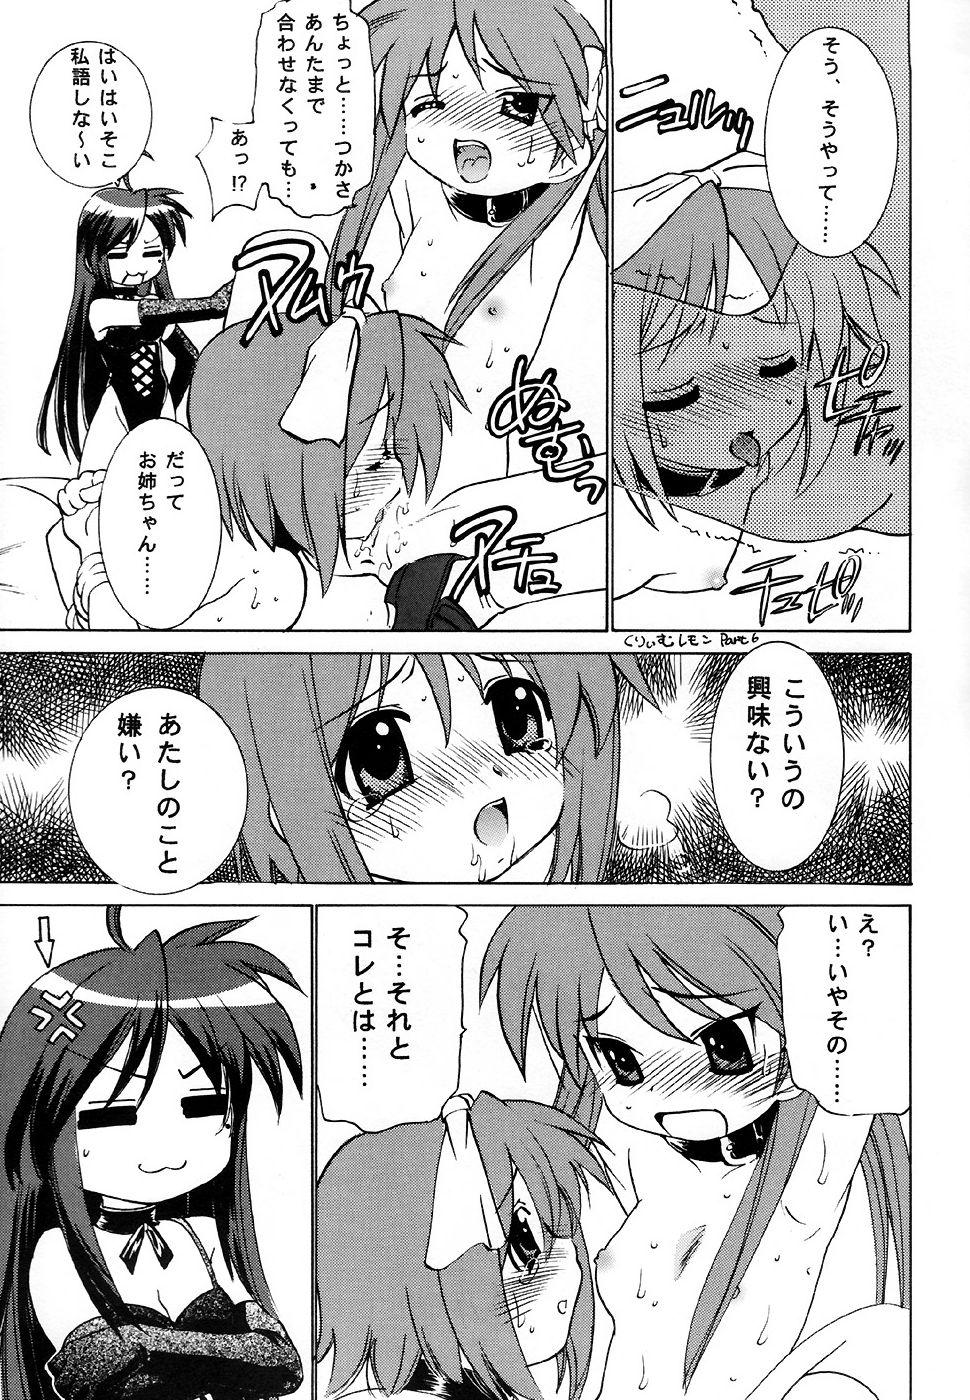 Swinger Hame ma suta - Lucky star Inked - Page 6